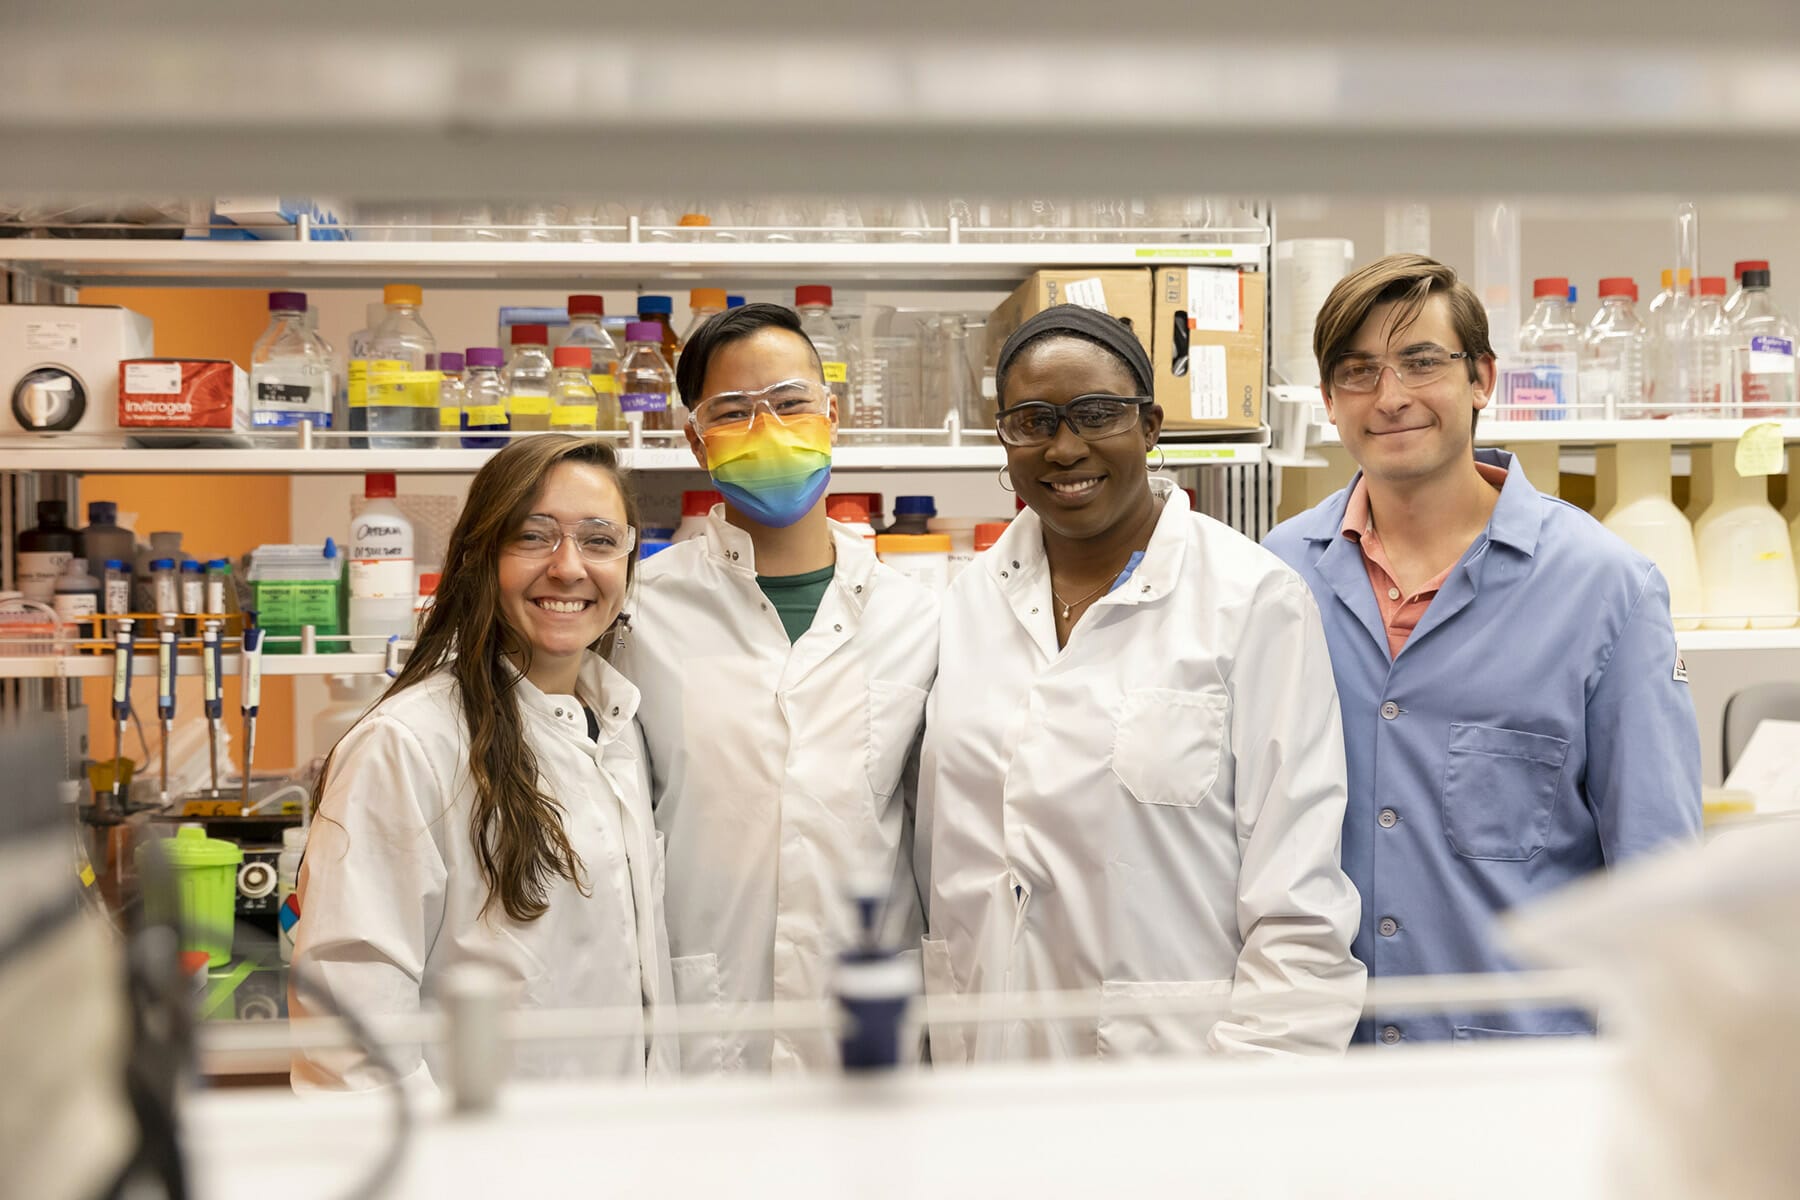 Four scientists from Catena Biosciences wearing lab coats